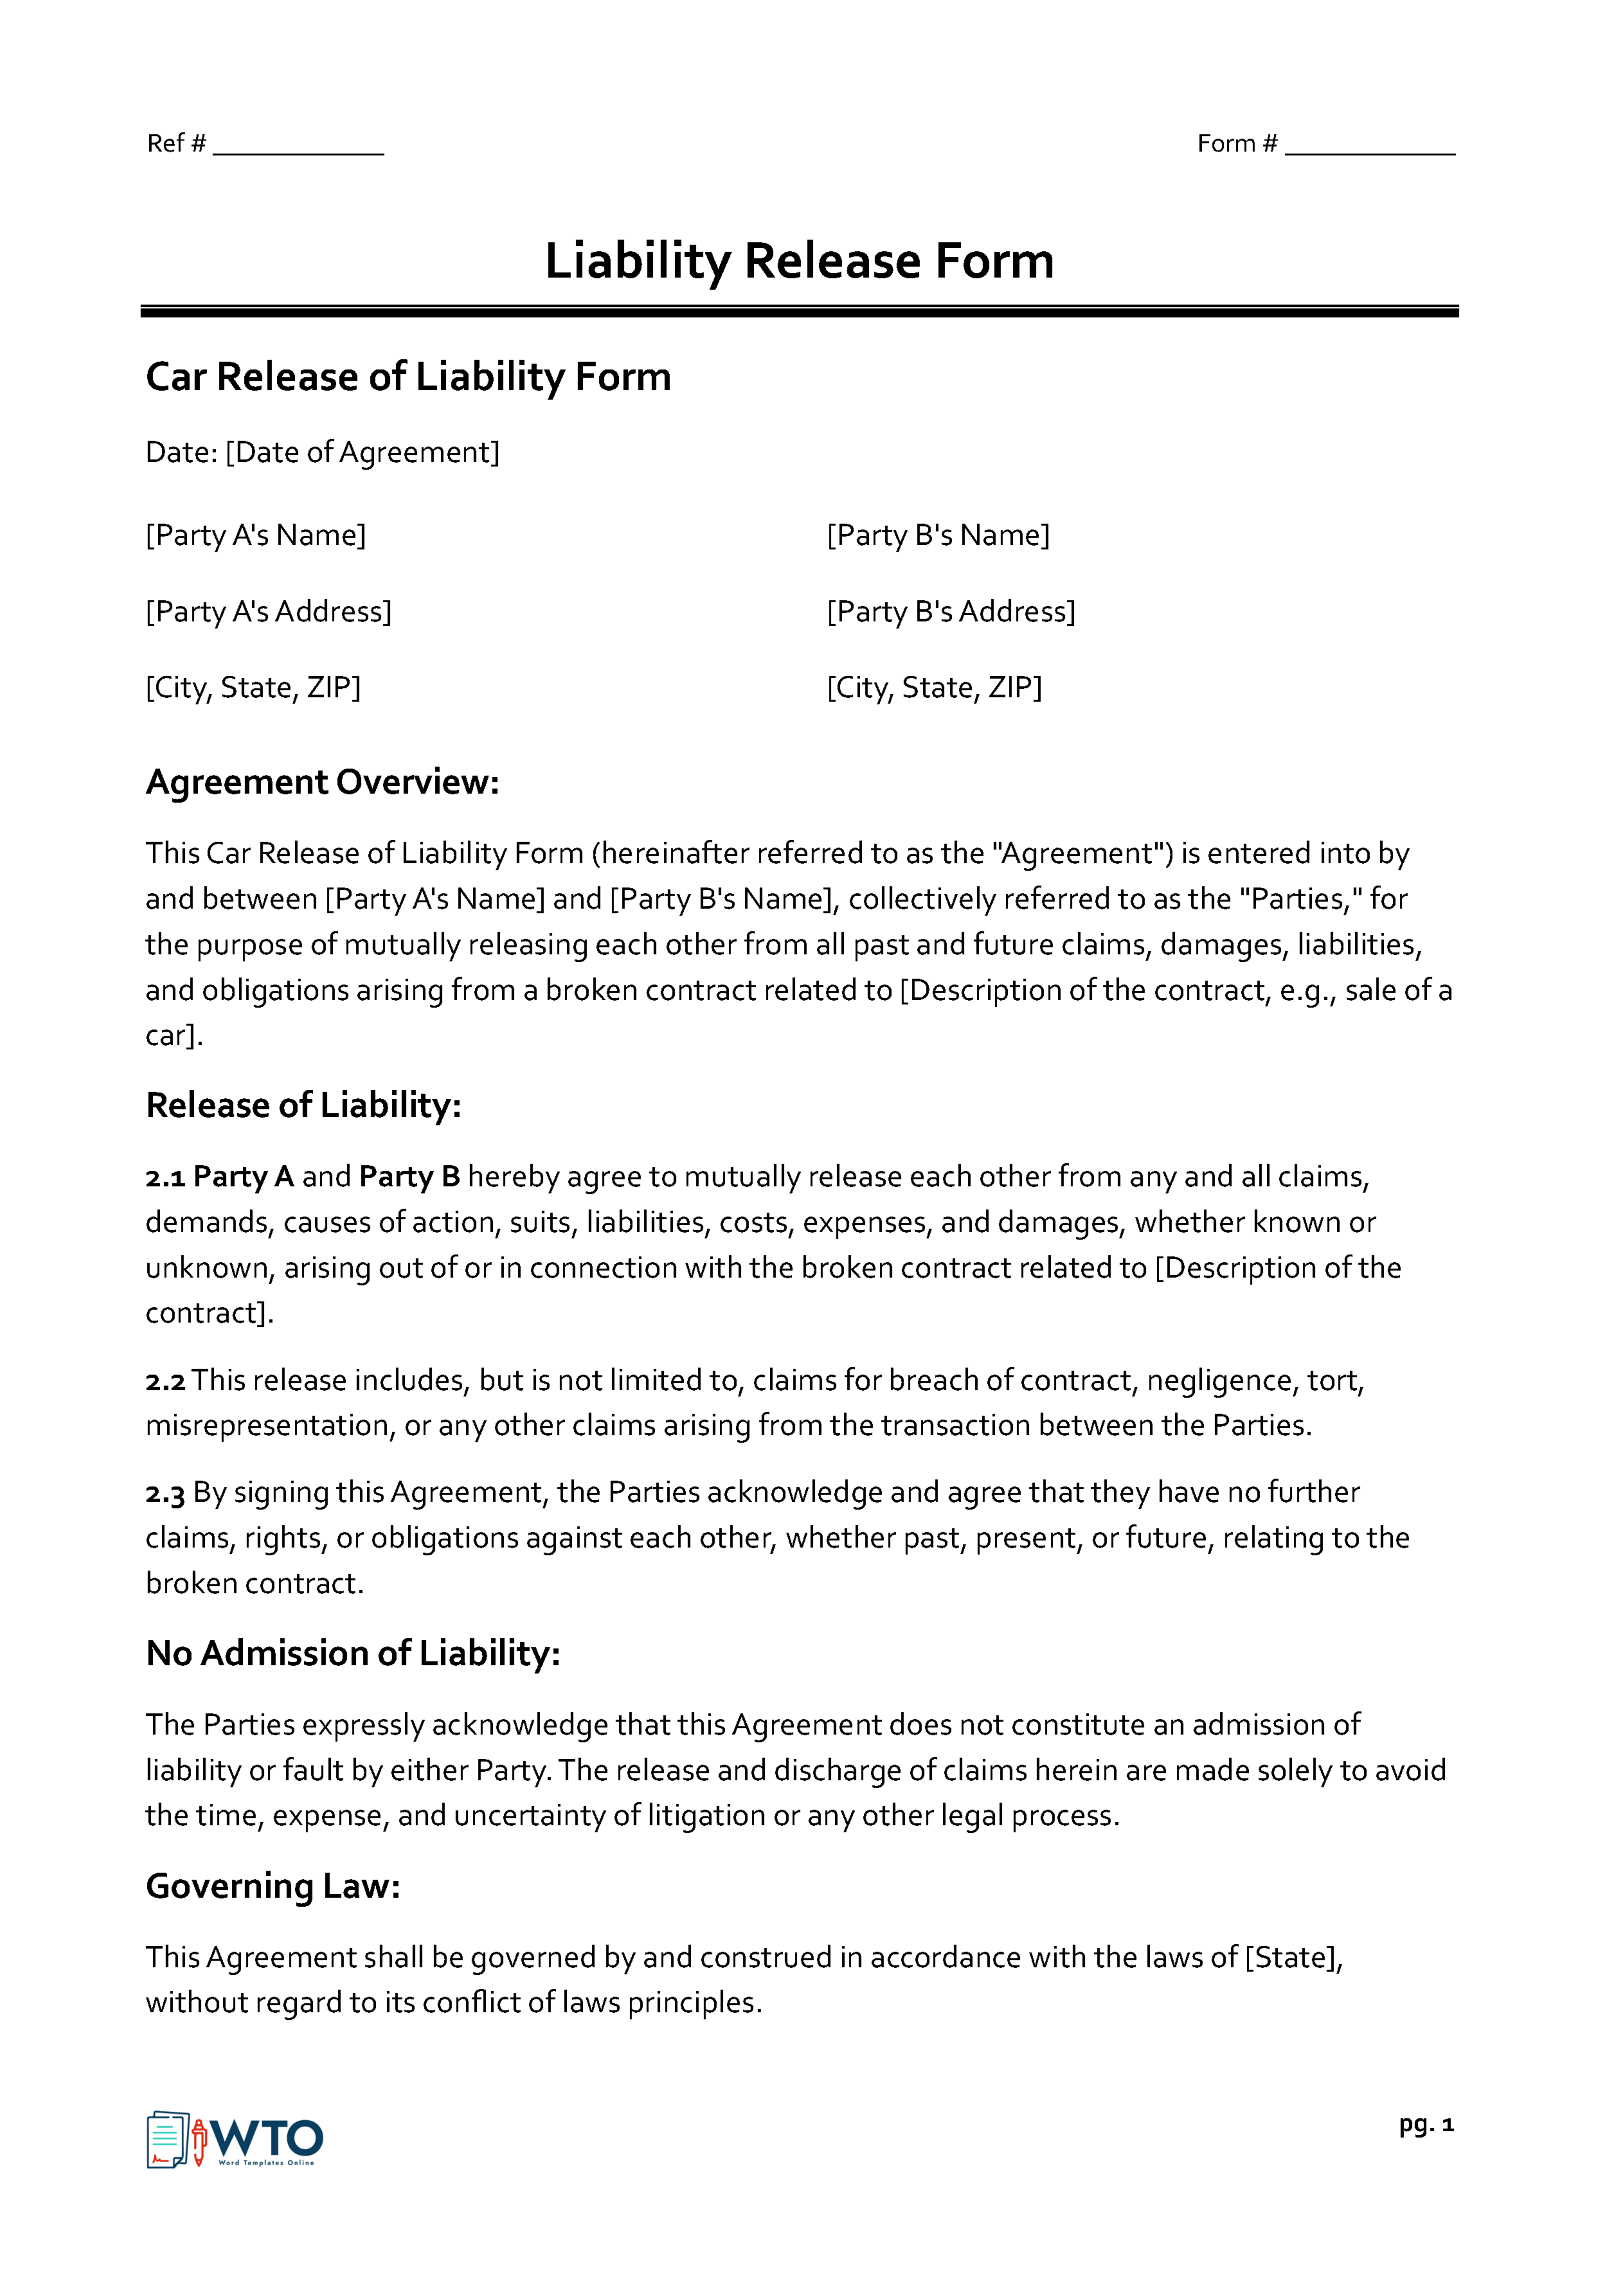 Free Downloadable Car Release of Liability Form for Word Document